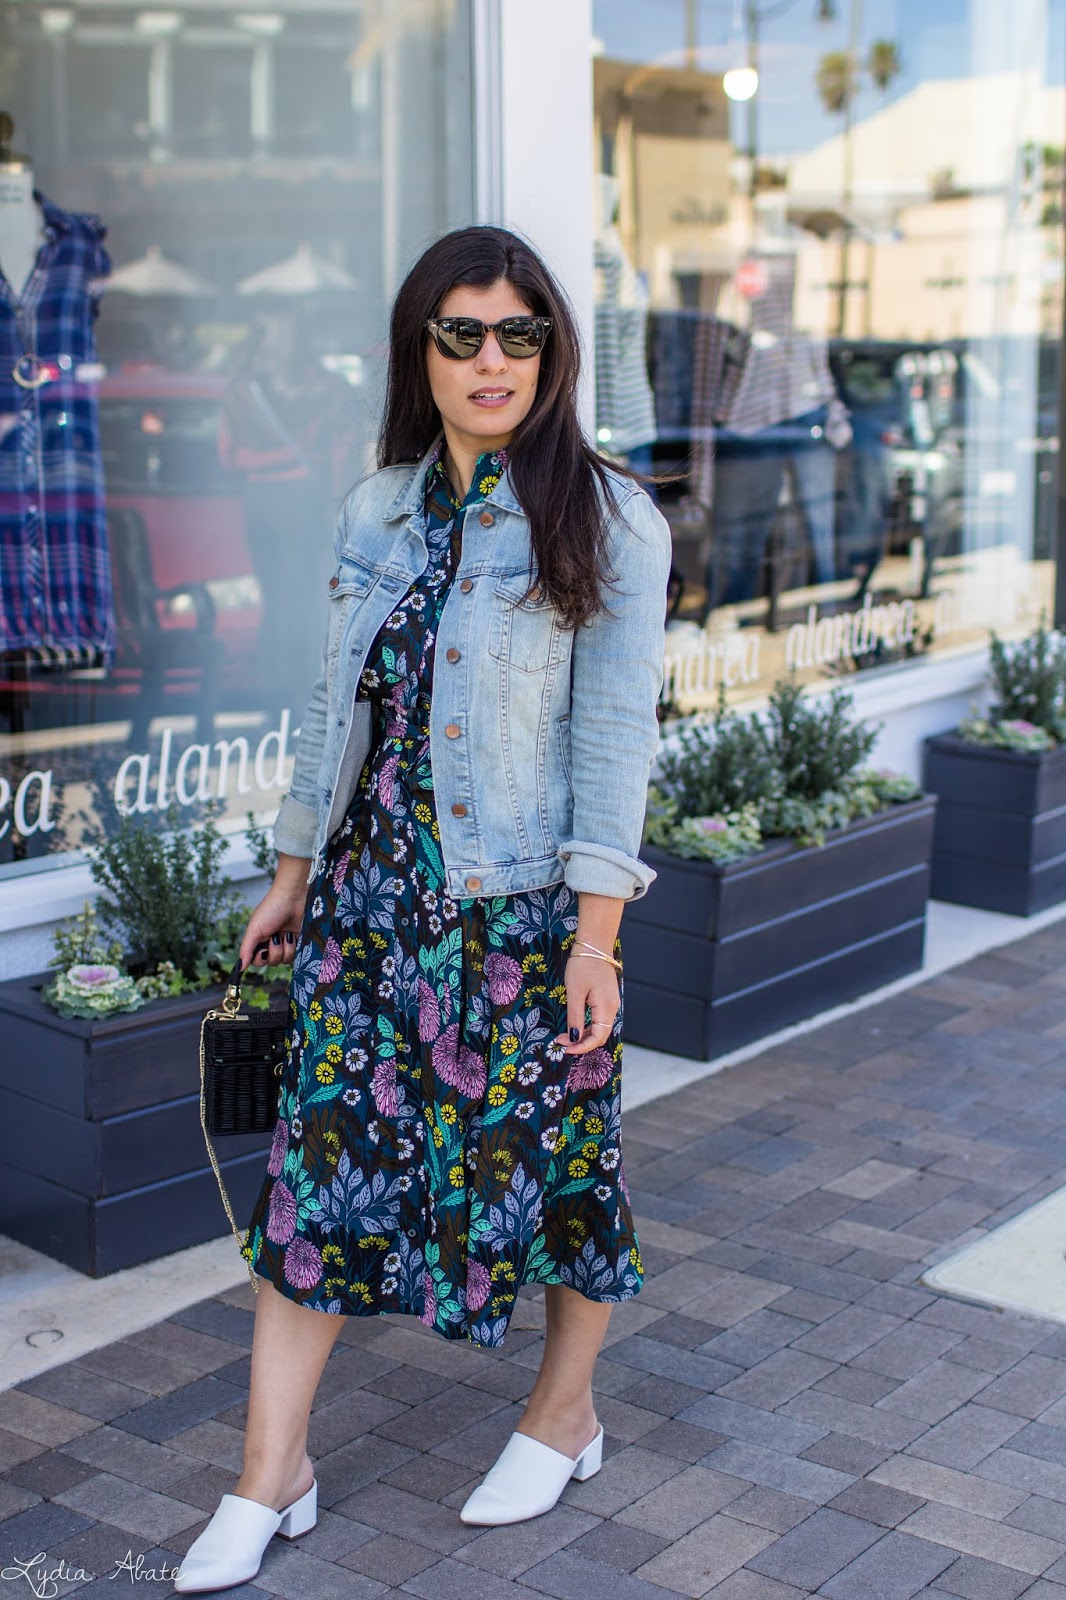 Fair Weather Floral - Chic on the Cheap | Connecticut based style ...